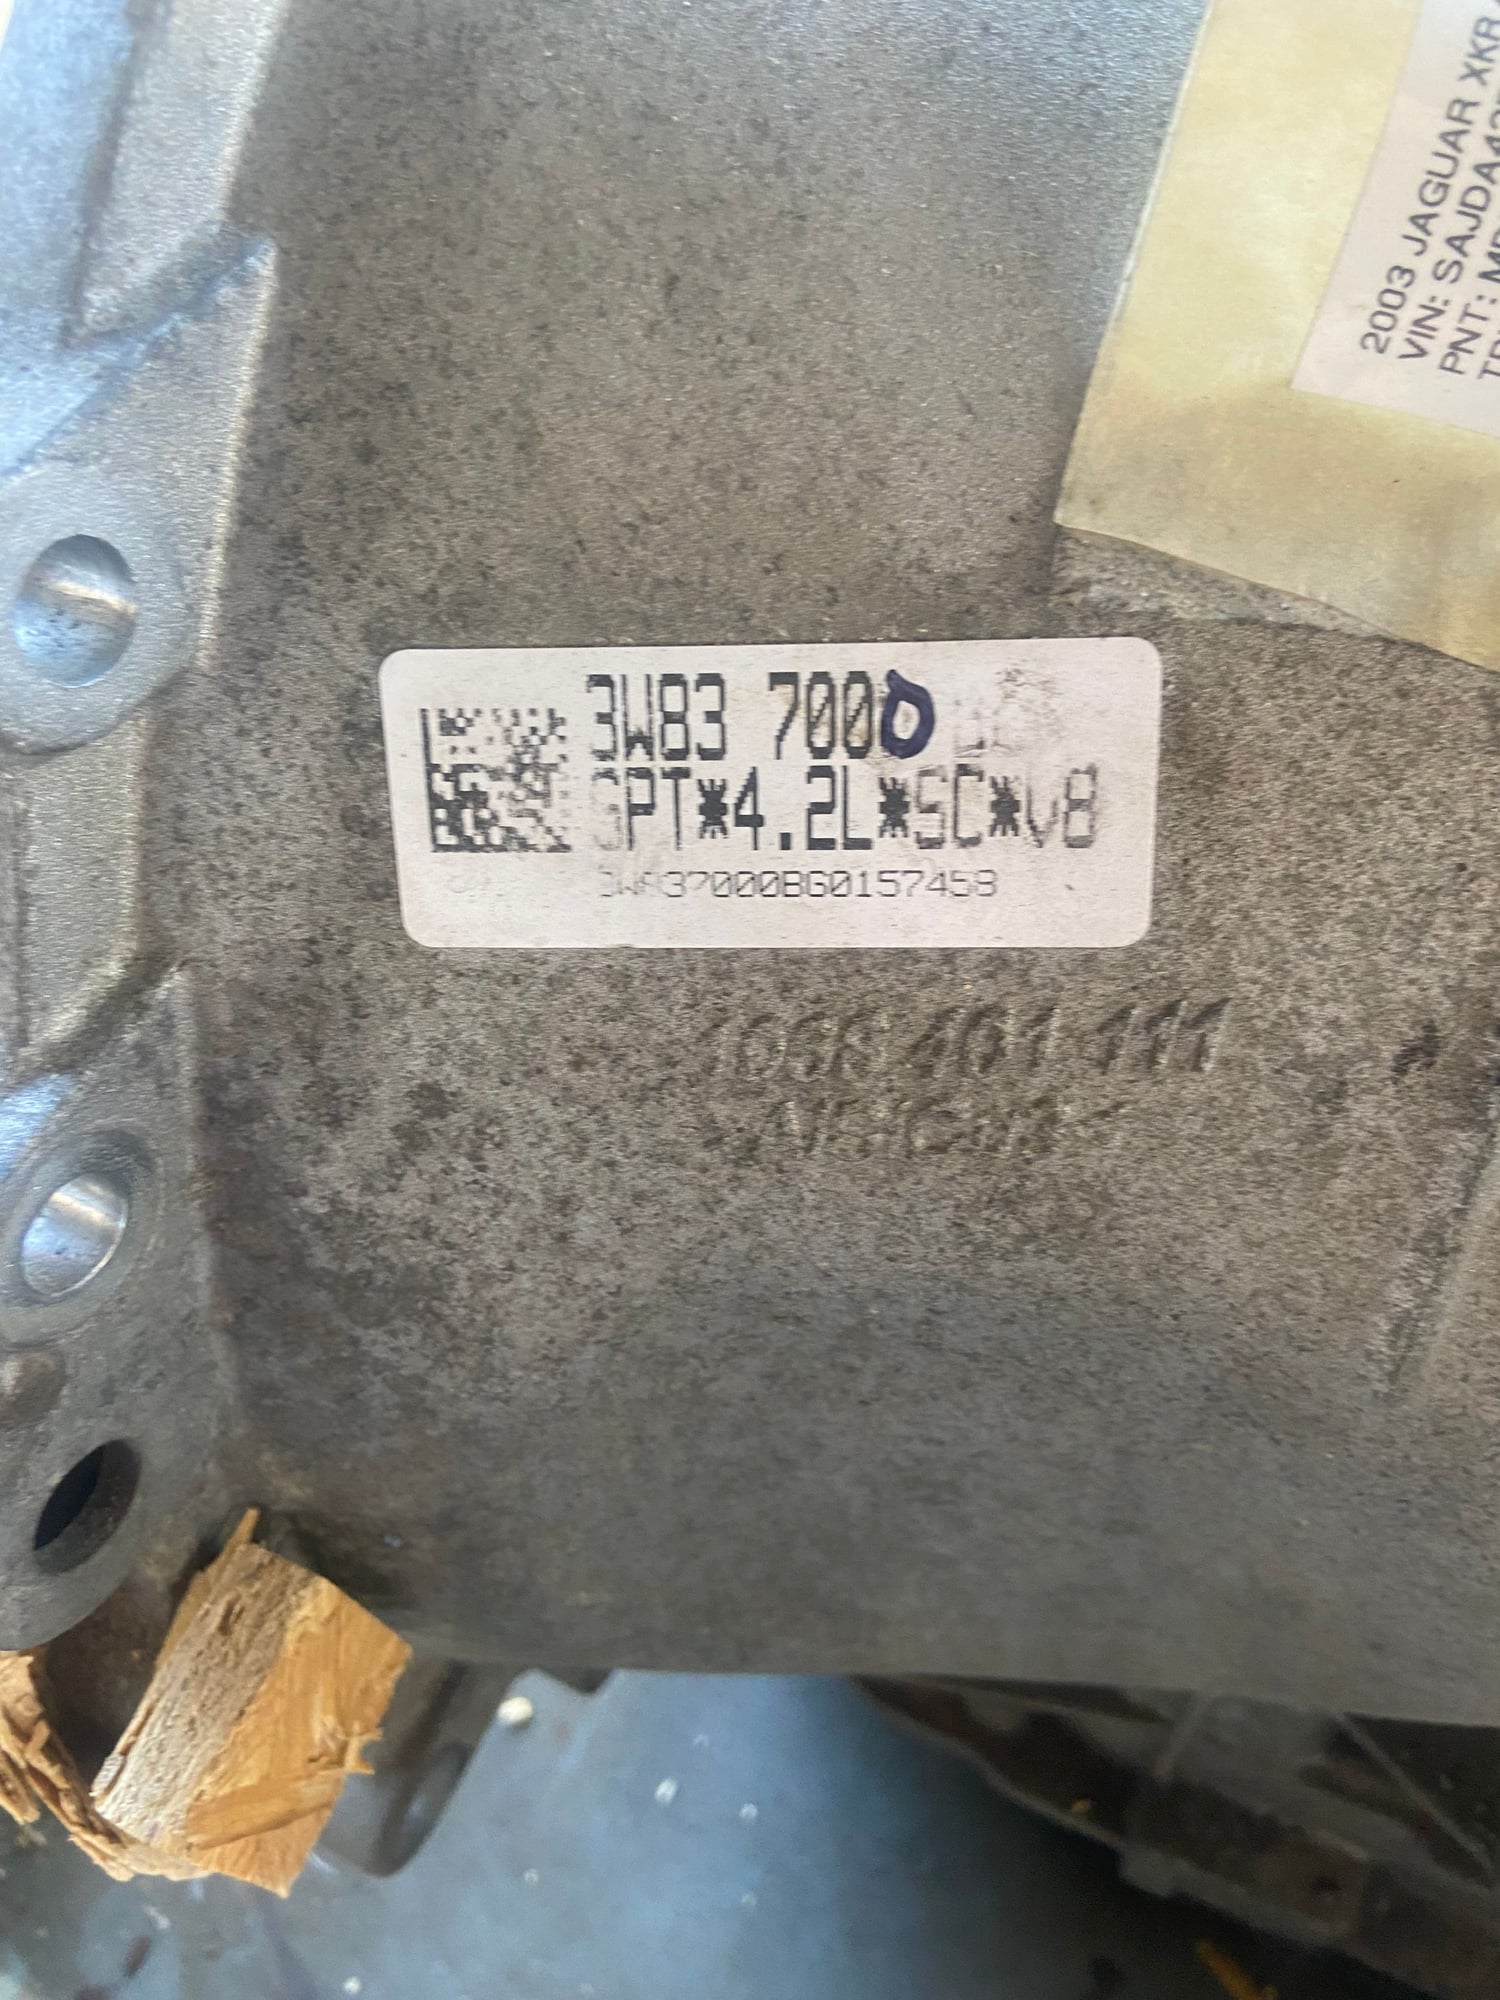 Drivetrain - Zf6hp26 with converter for R models - Used - 2003 to 2008 Jaguar XKR - 2003 to 2008 Jaguar S-Type - 2003 to 2008 Jaguar XJR - Tulare, CA 93274, United States